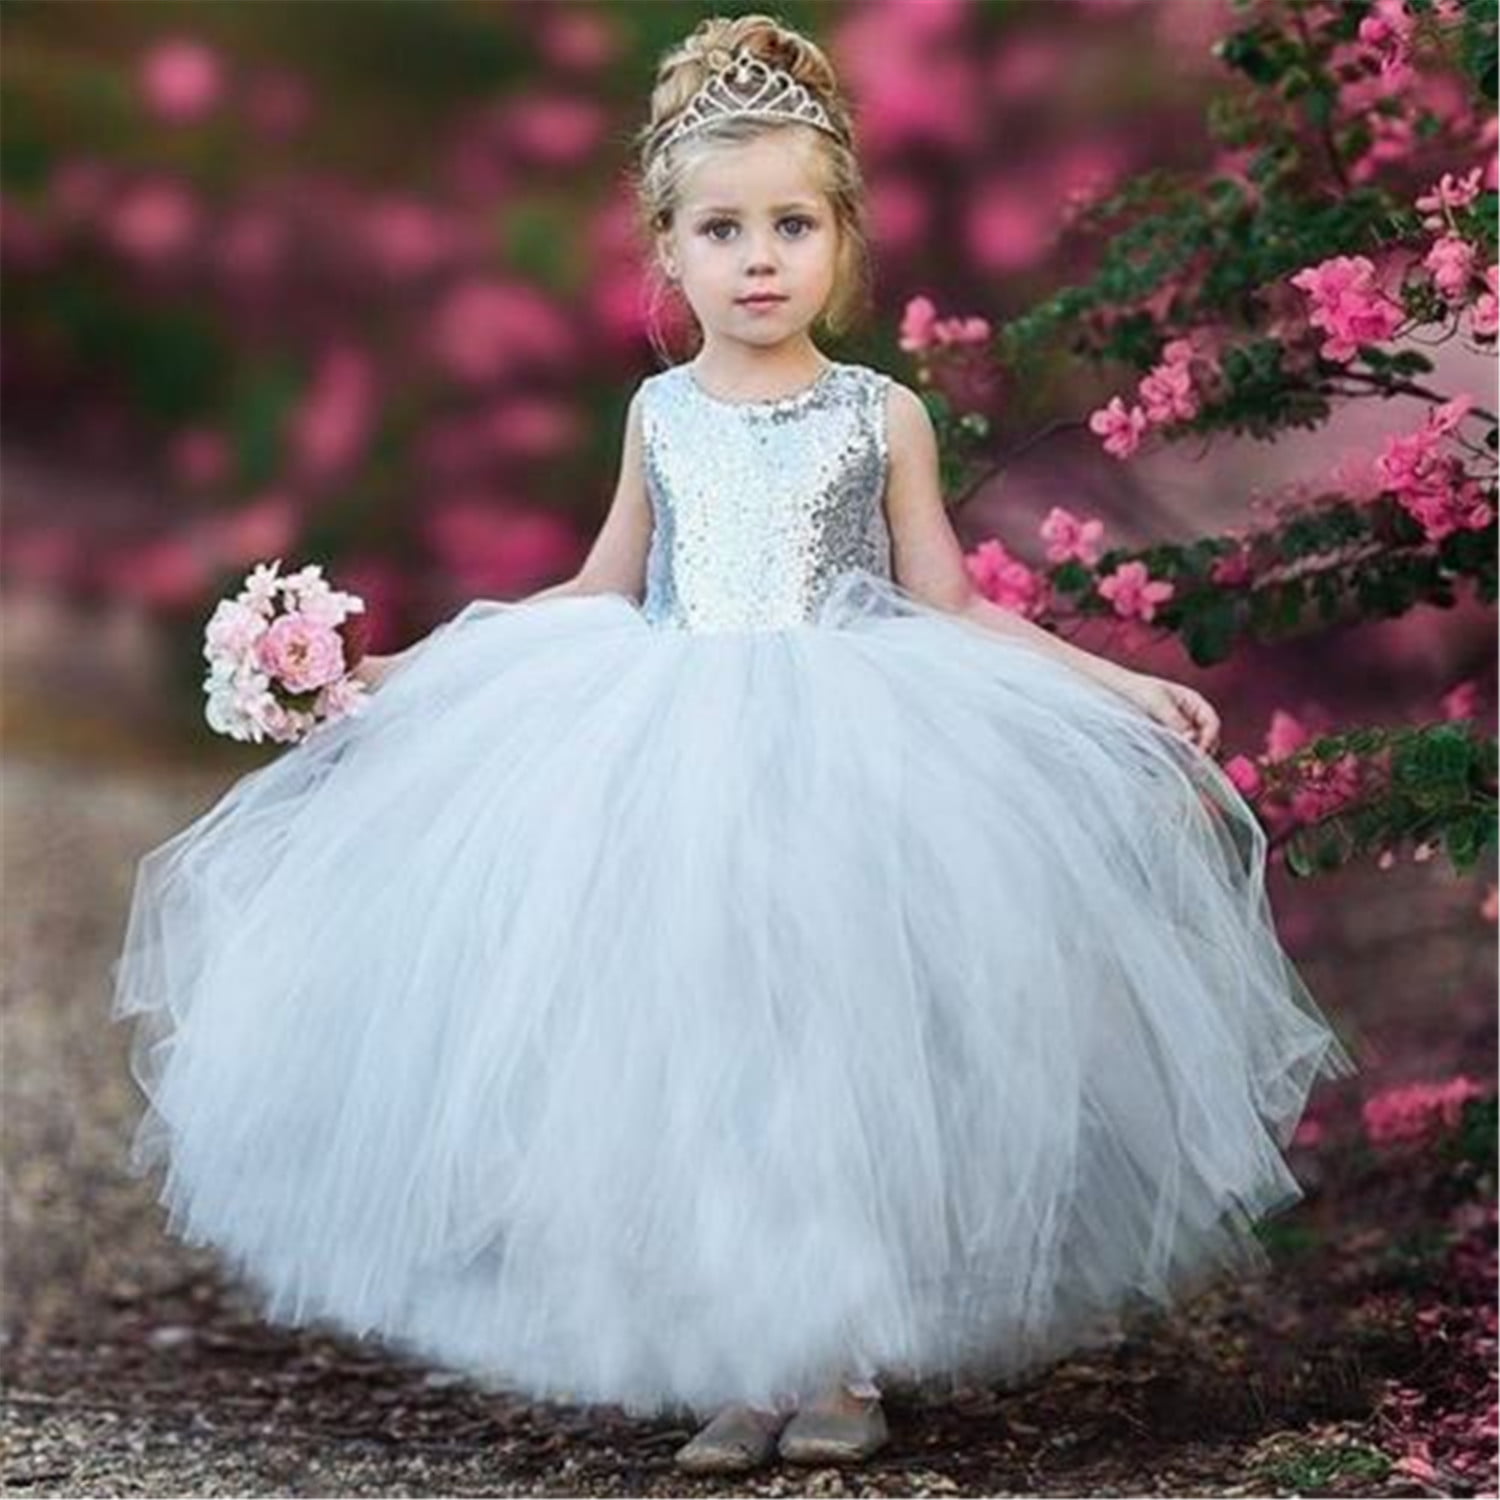 Sky Blue Lace Applique Princess Evening Gown For Girls Perfect For  Pageants, Proms, And First Communion From Cucu, $105.53 | DHgate.Com